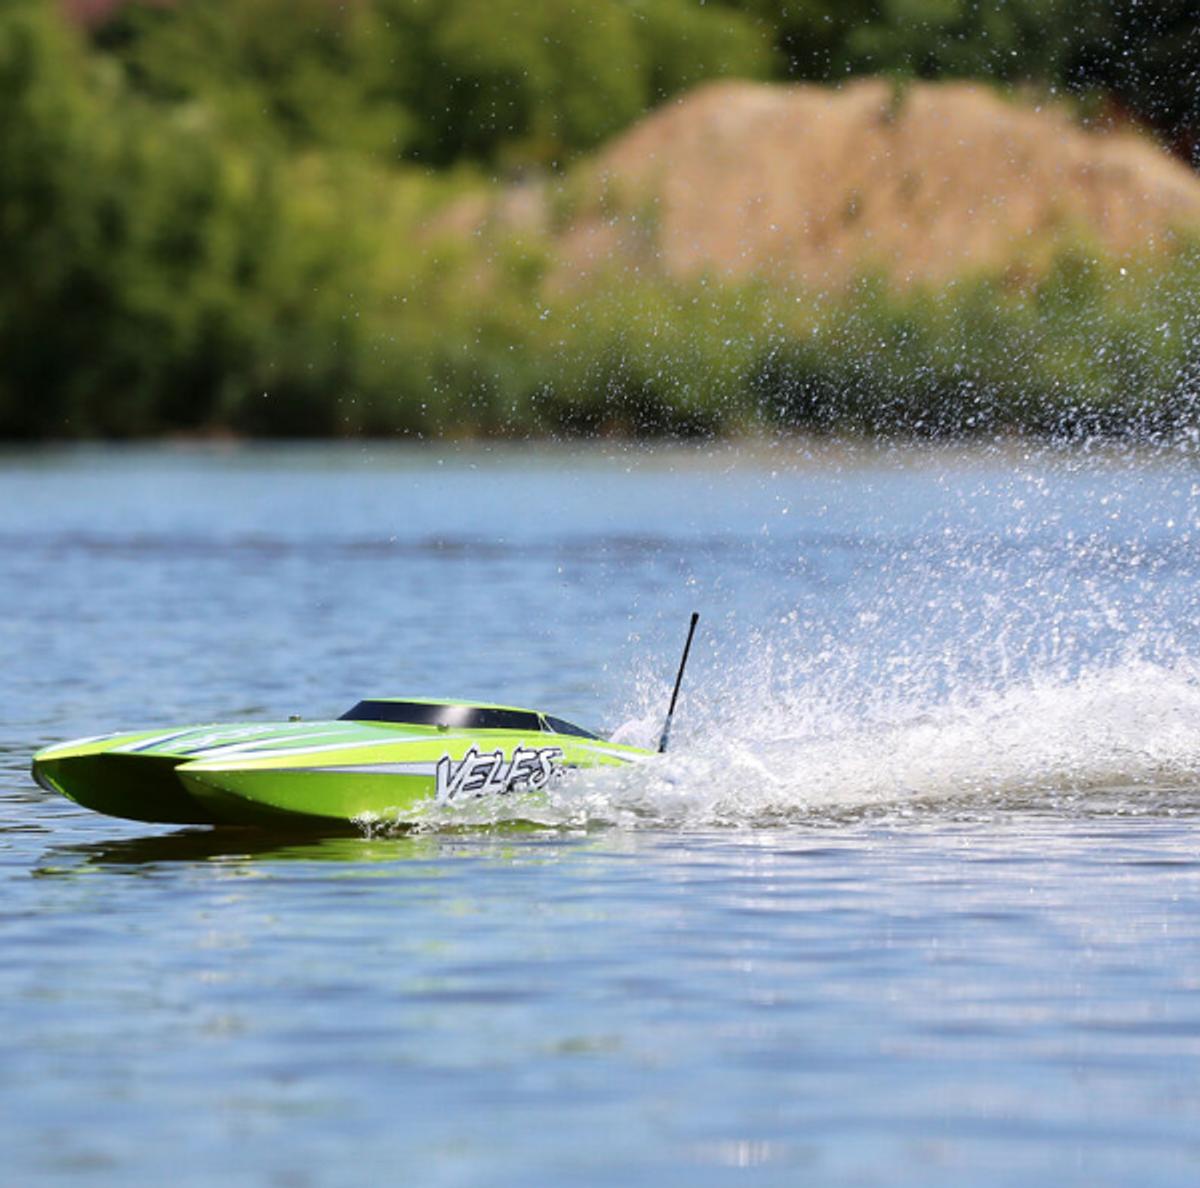 Veles 29 Rc Boat: Streamlined design for maximum speed and agility - the Veles 29 RC Boat